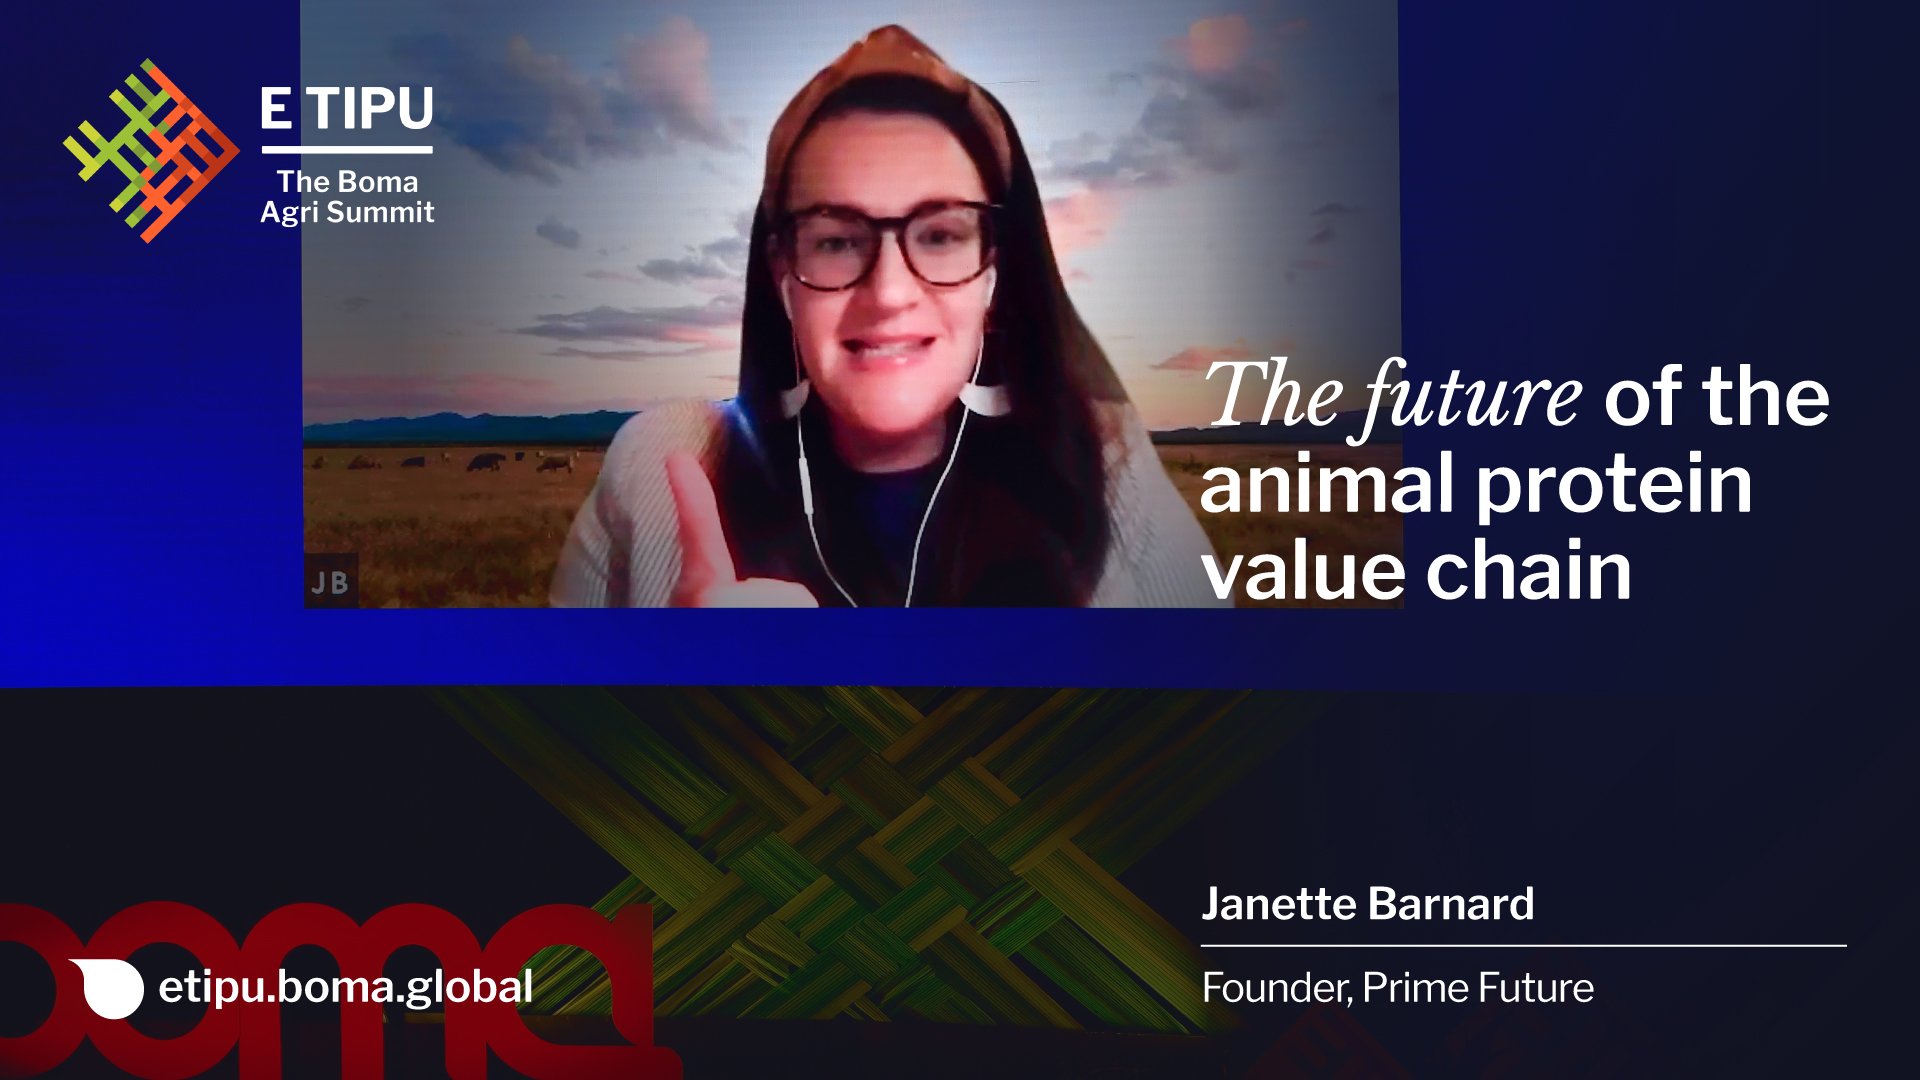 The future of the animal protein value chain | Janette Barnard